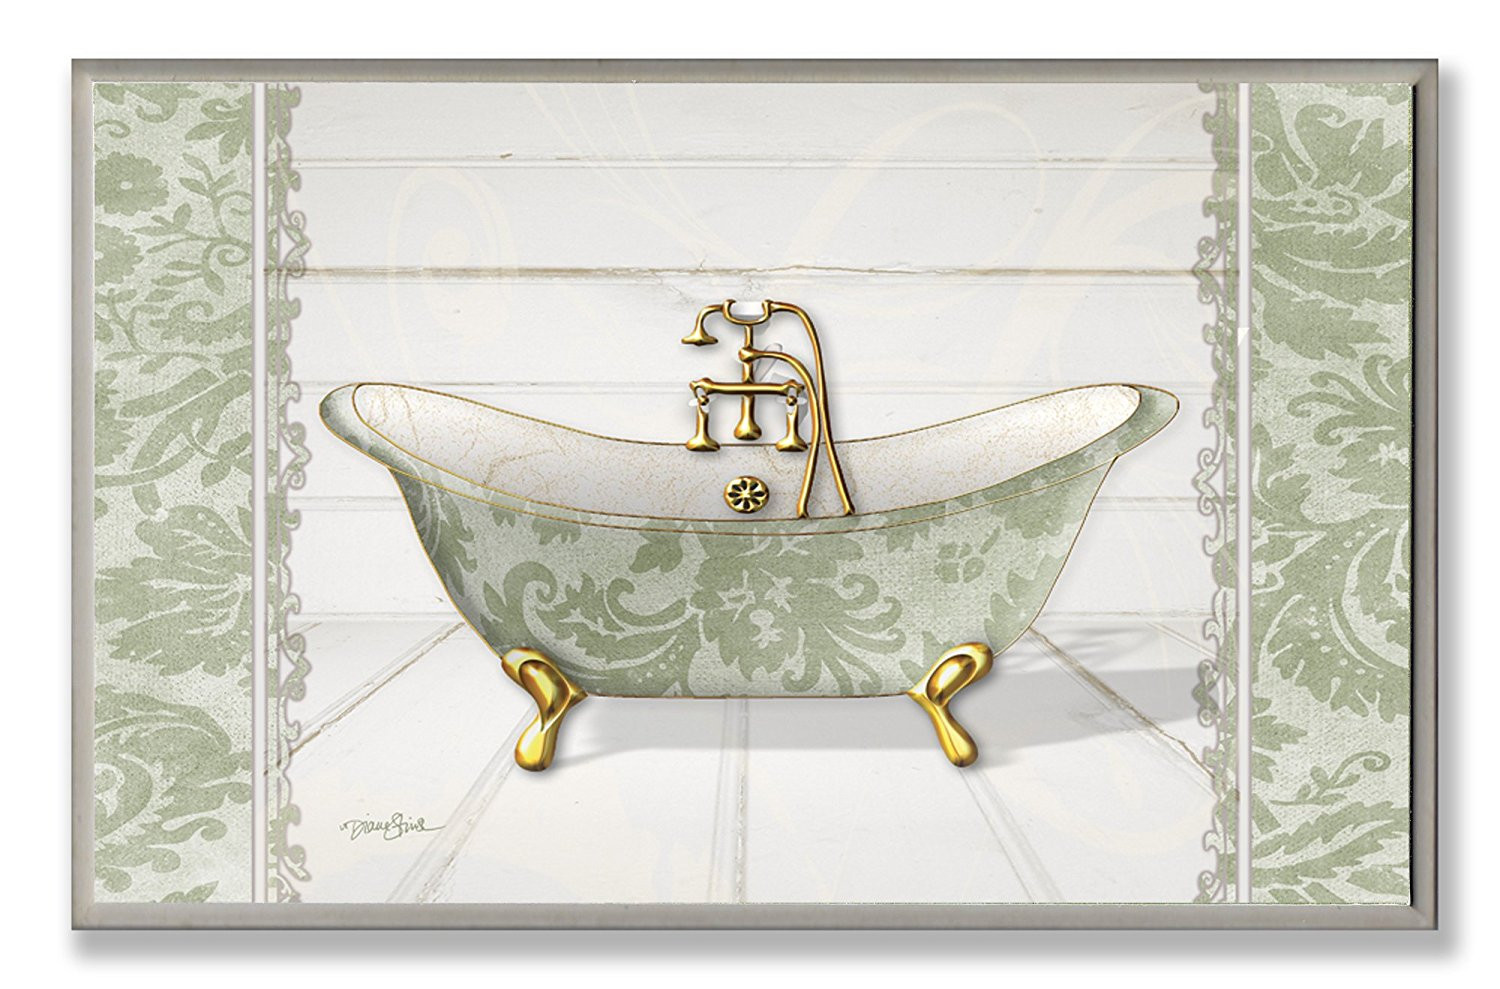 Bathroom Wall Plaques
 The Stupell Home Decor Collection Green Toile Tub Center